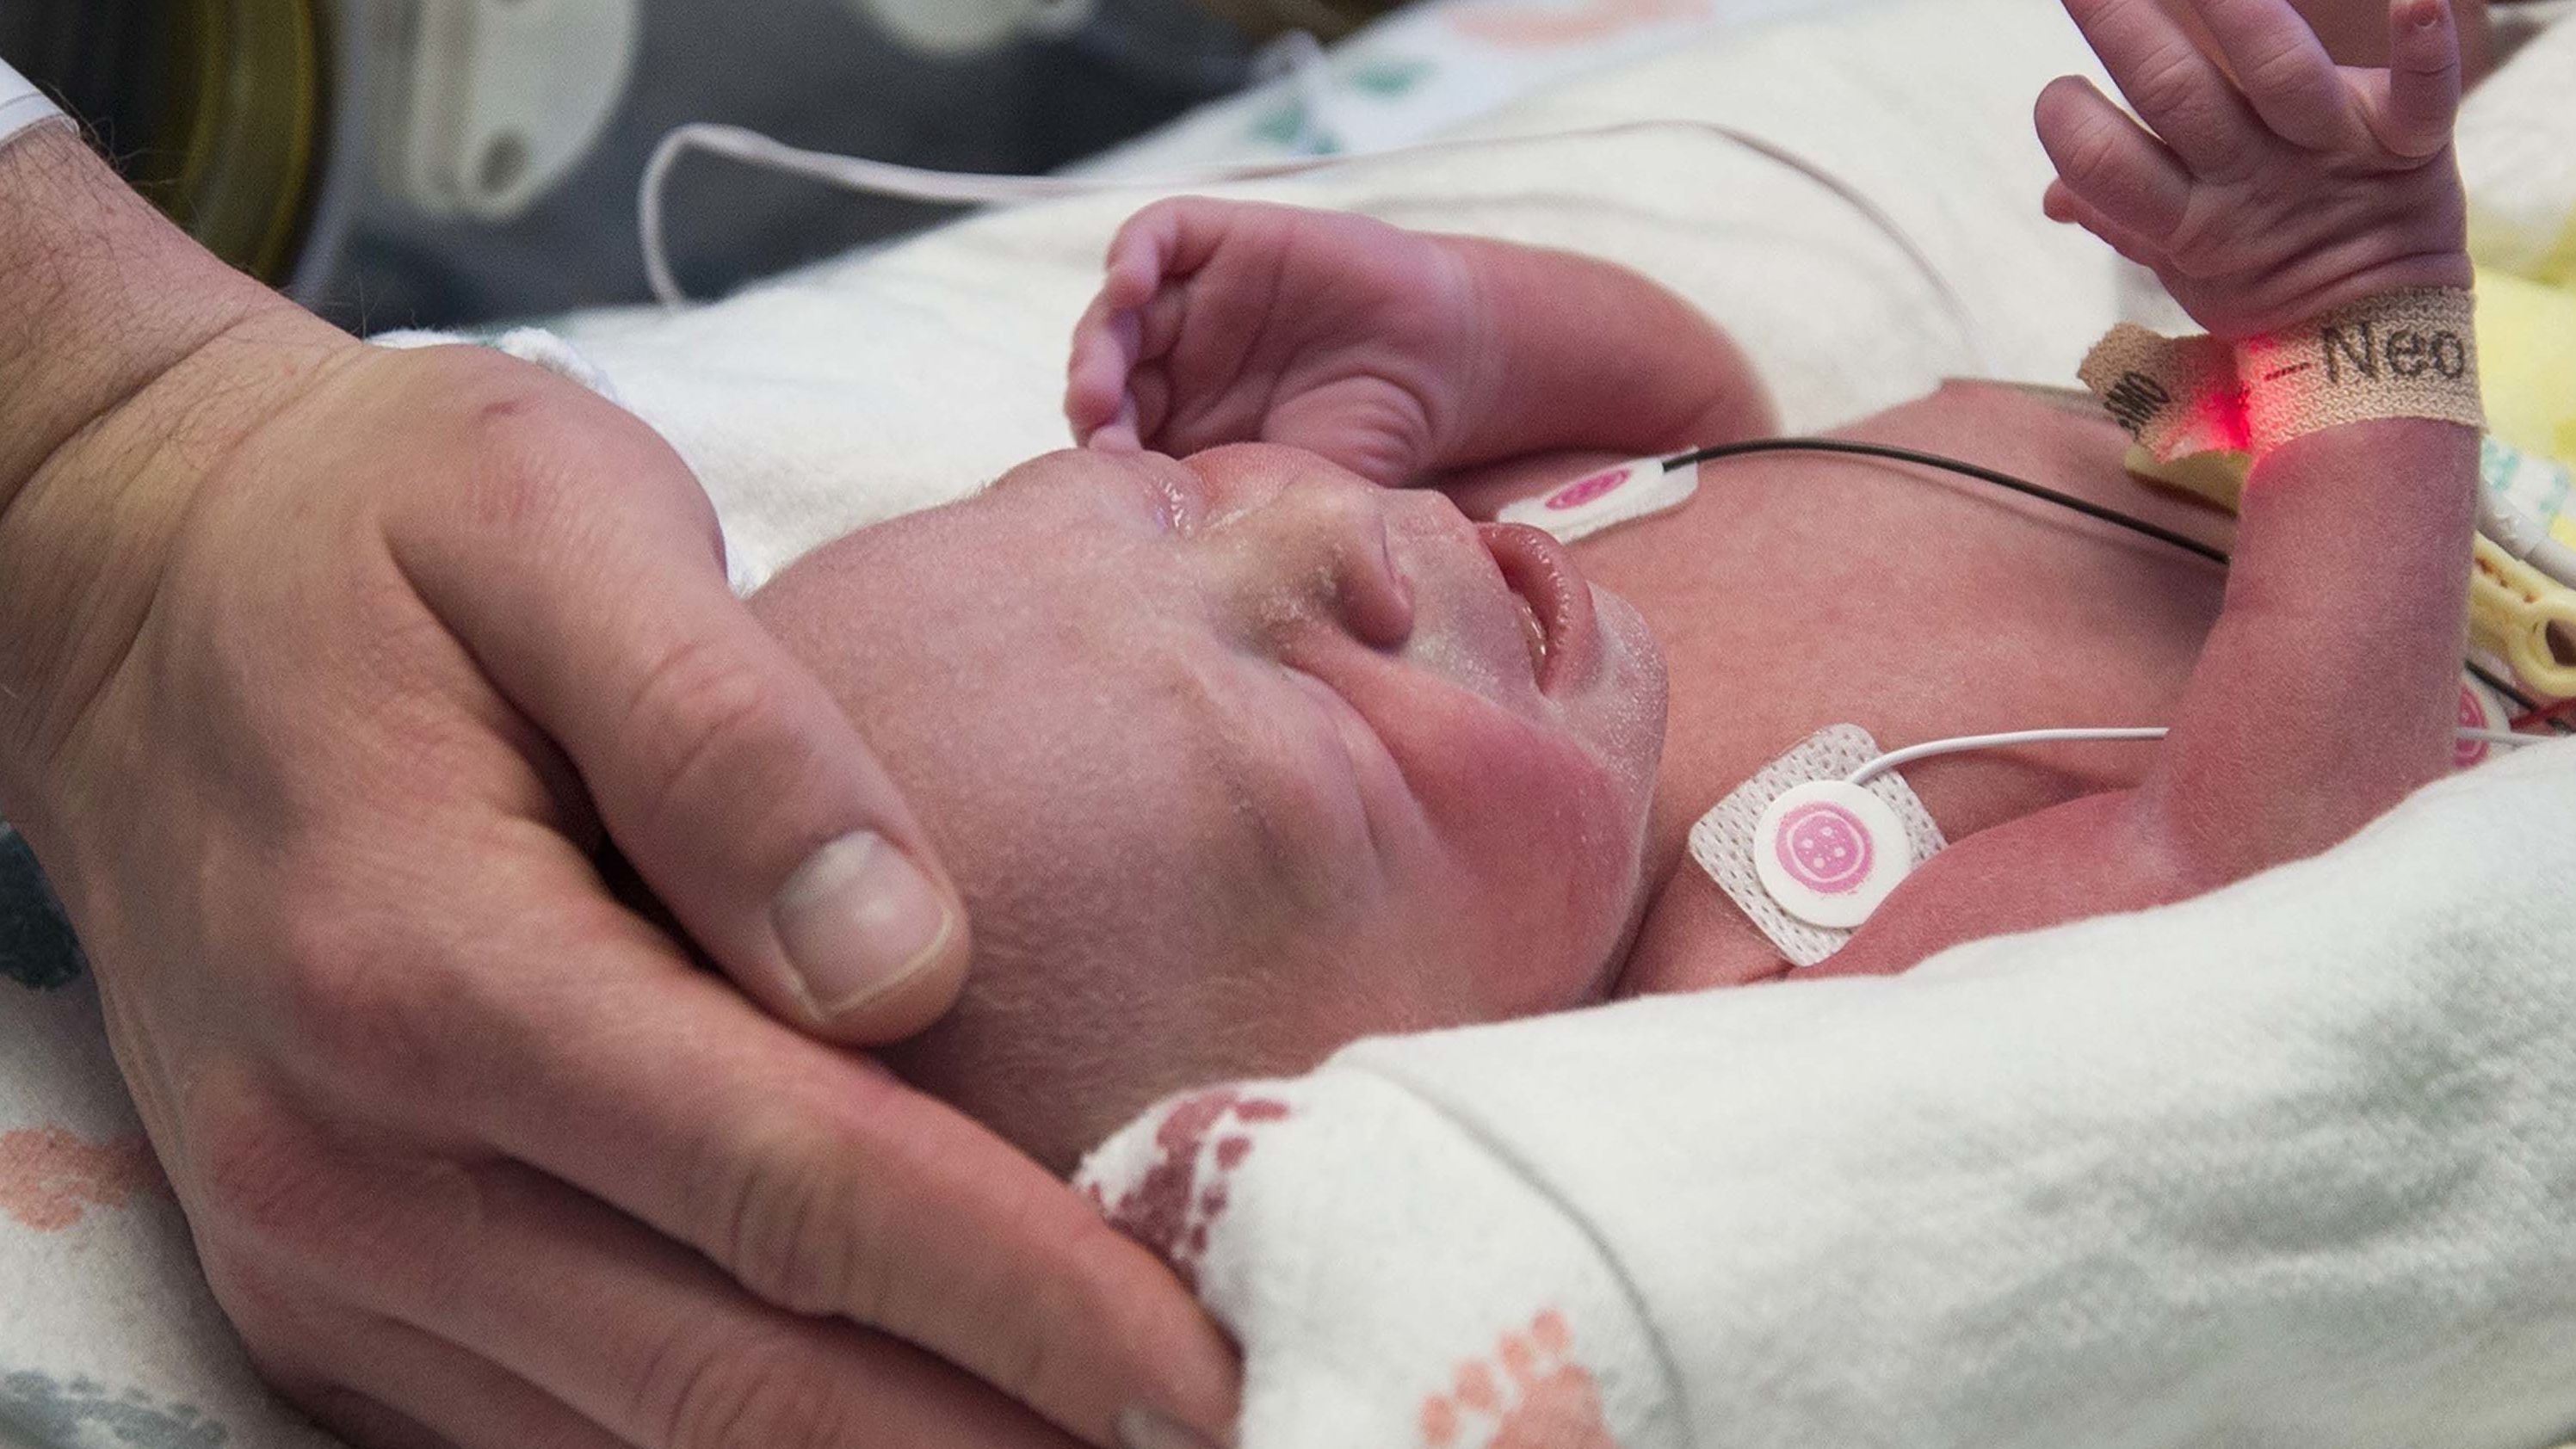 The first baby born as a result of a womb transplant in the United States lies in the neonatal unit at Baylor University Medical Center in Dallas.